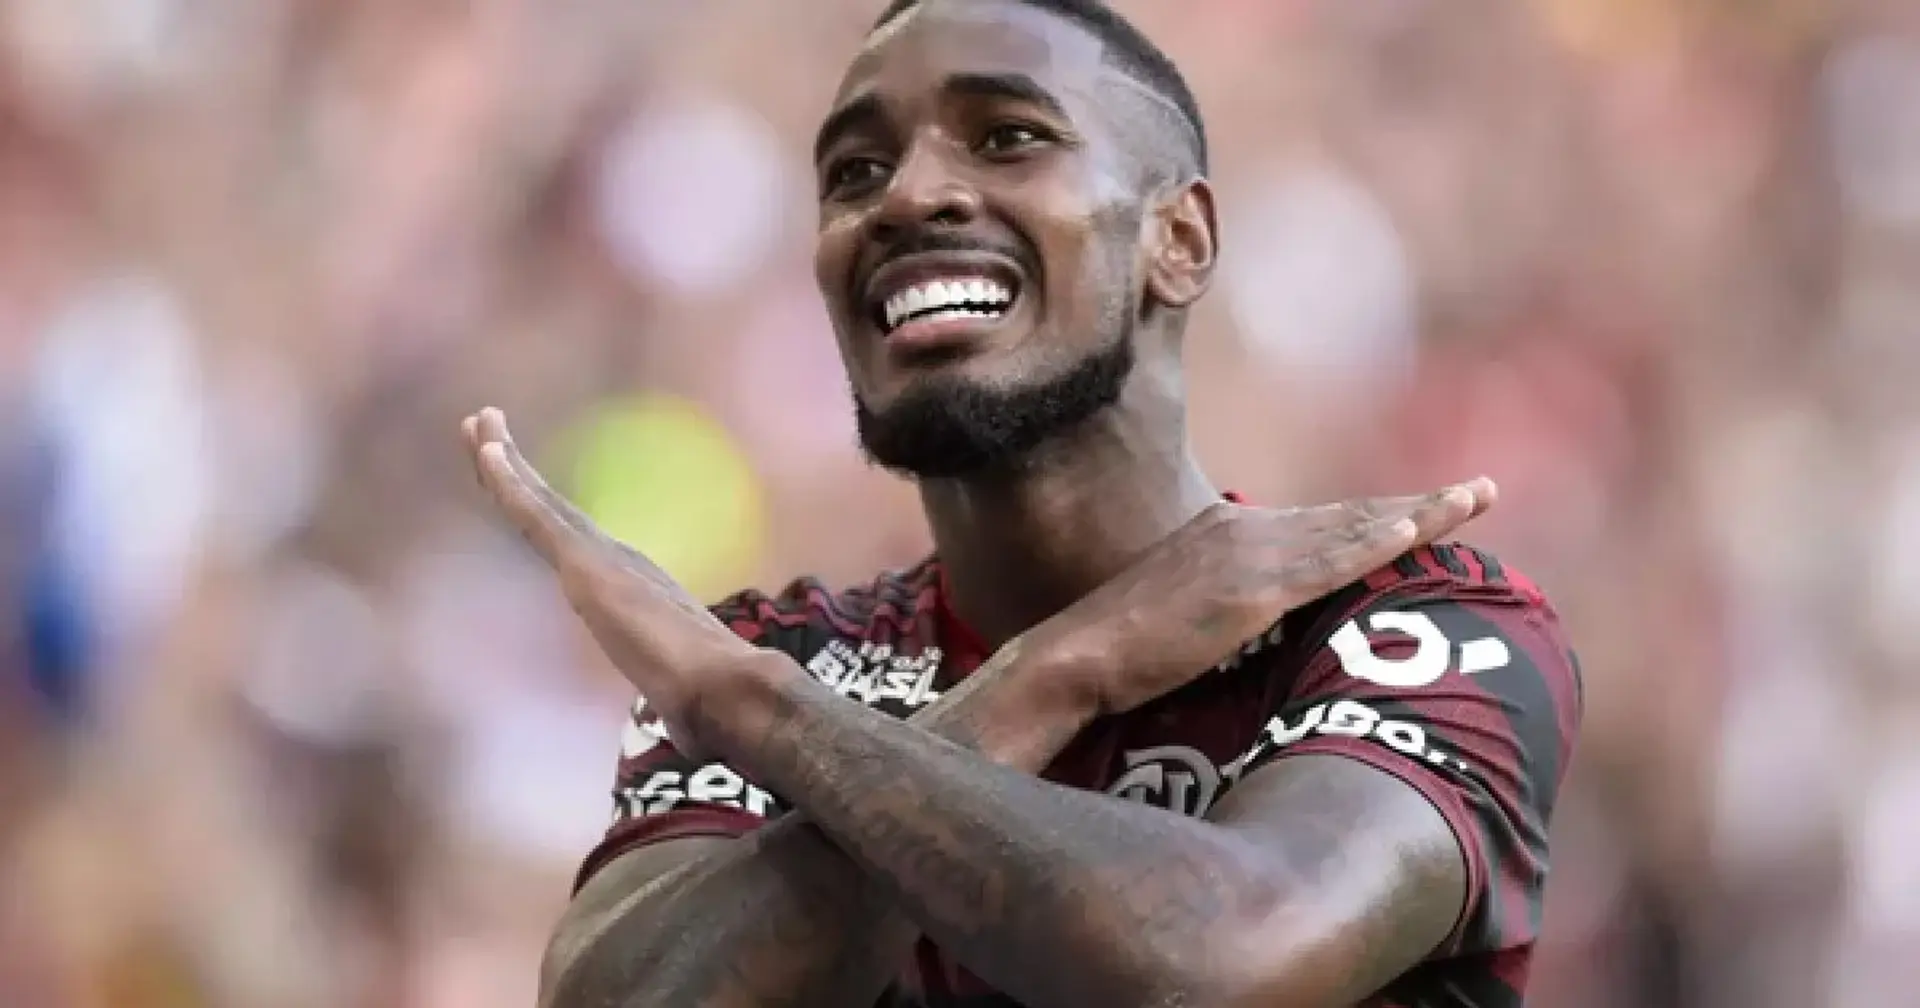 Arsenal-linked Gerson determined to stay at Flamengo for certain reason